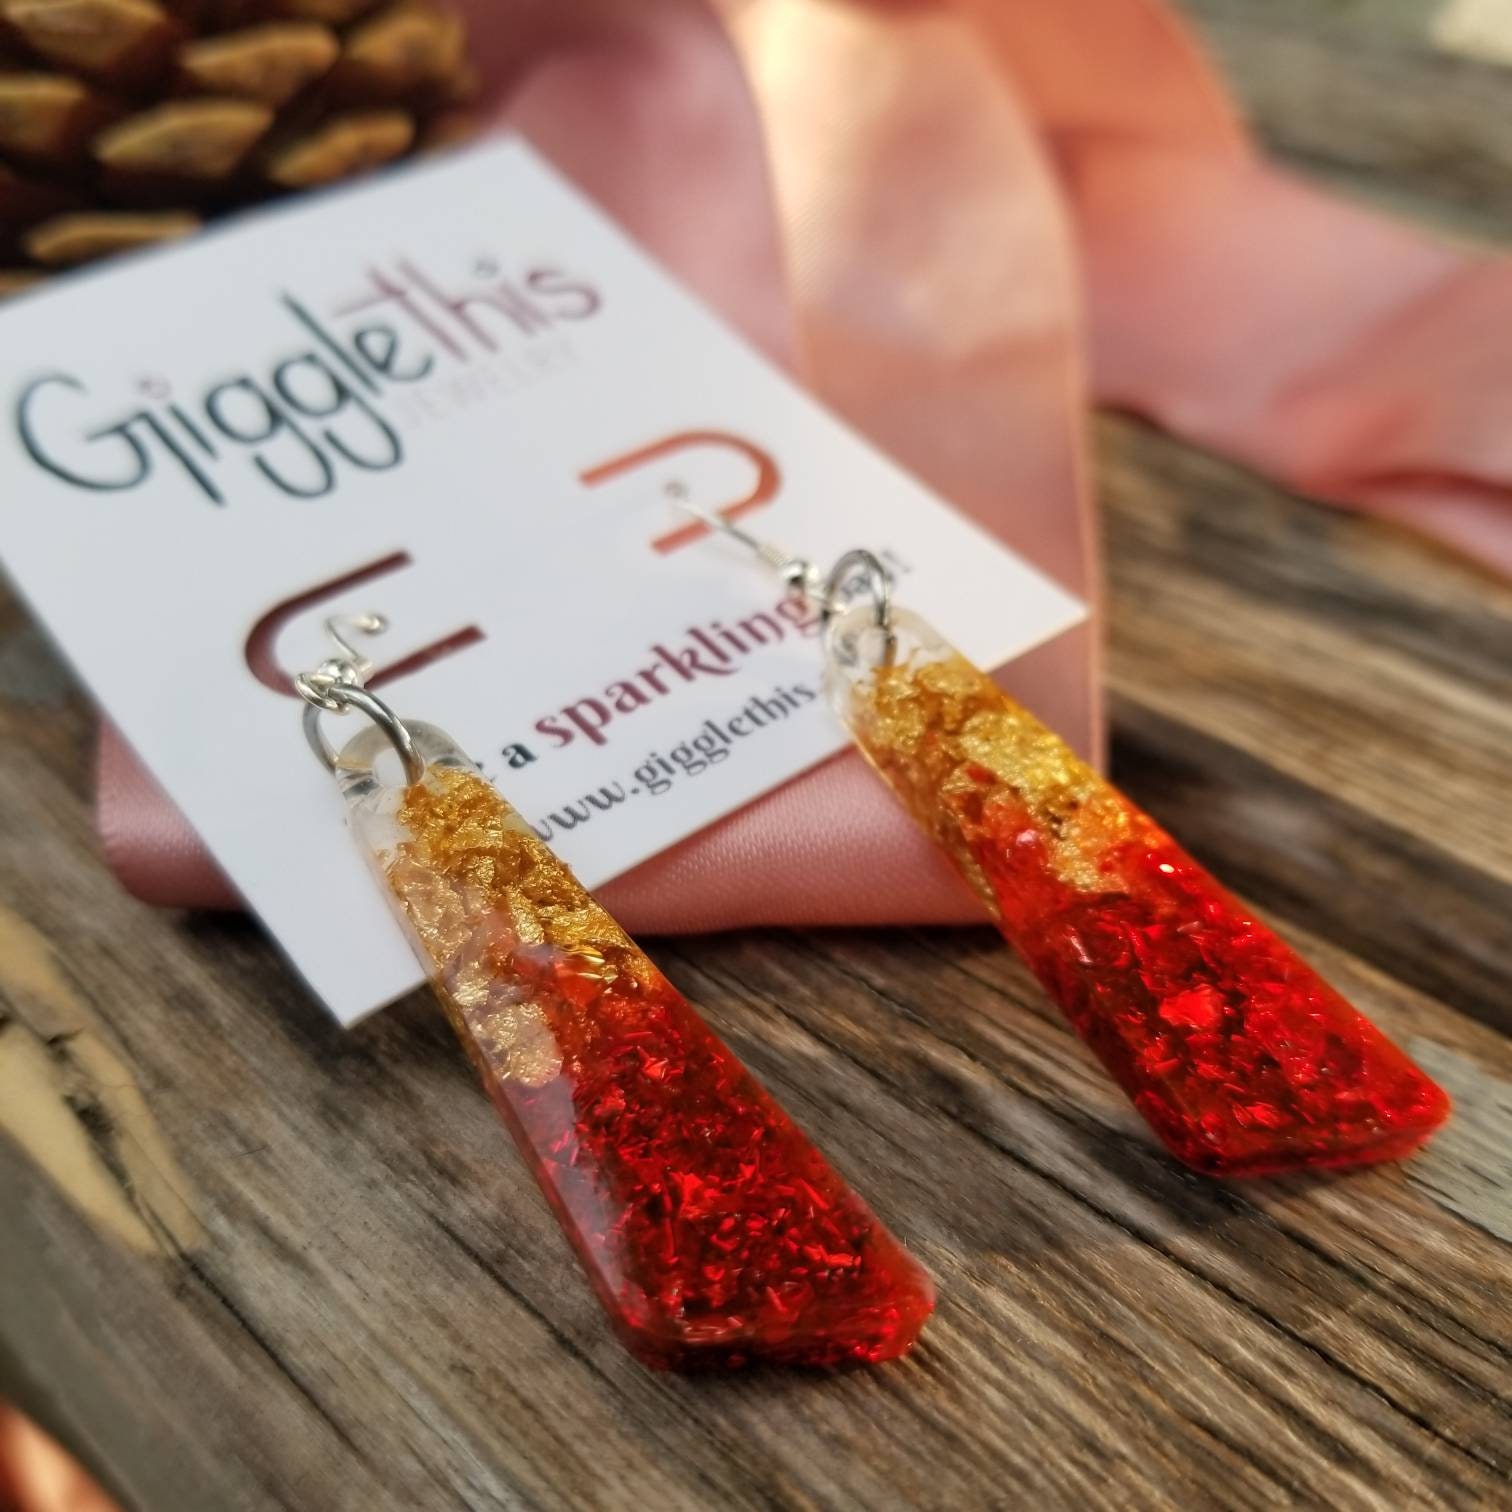 Gold and Red Resin Earrings (Authentic Pre-Owned)